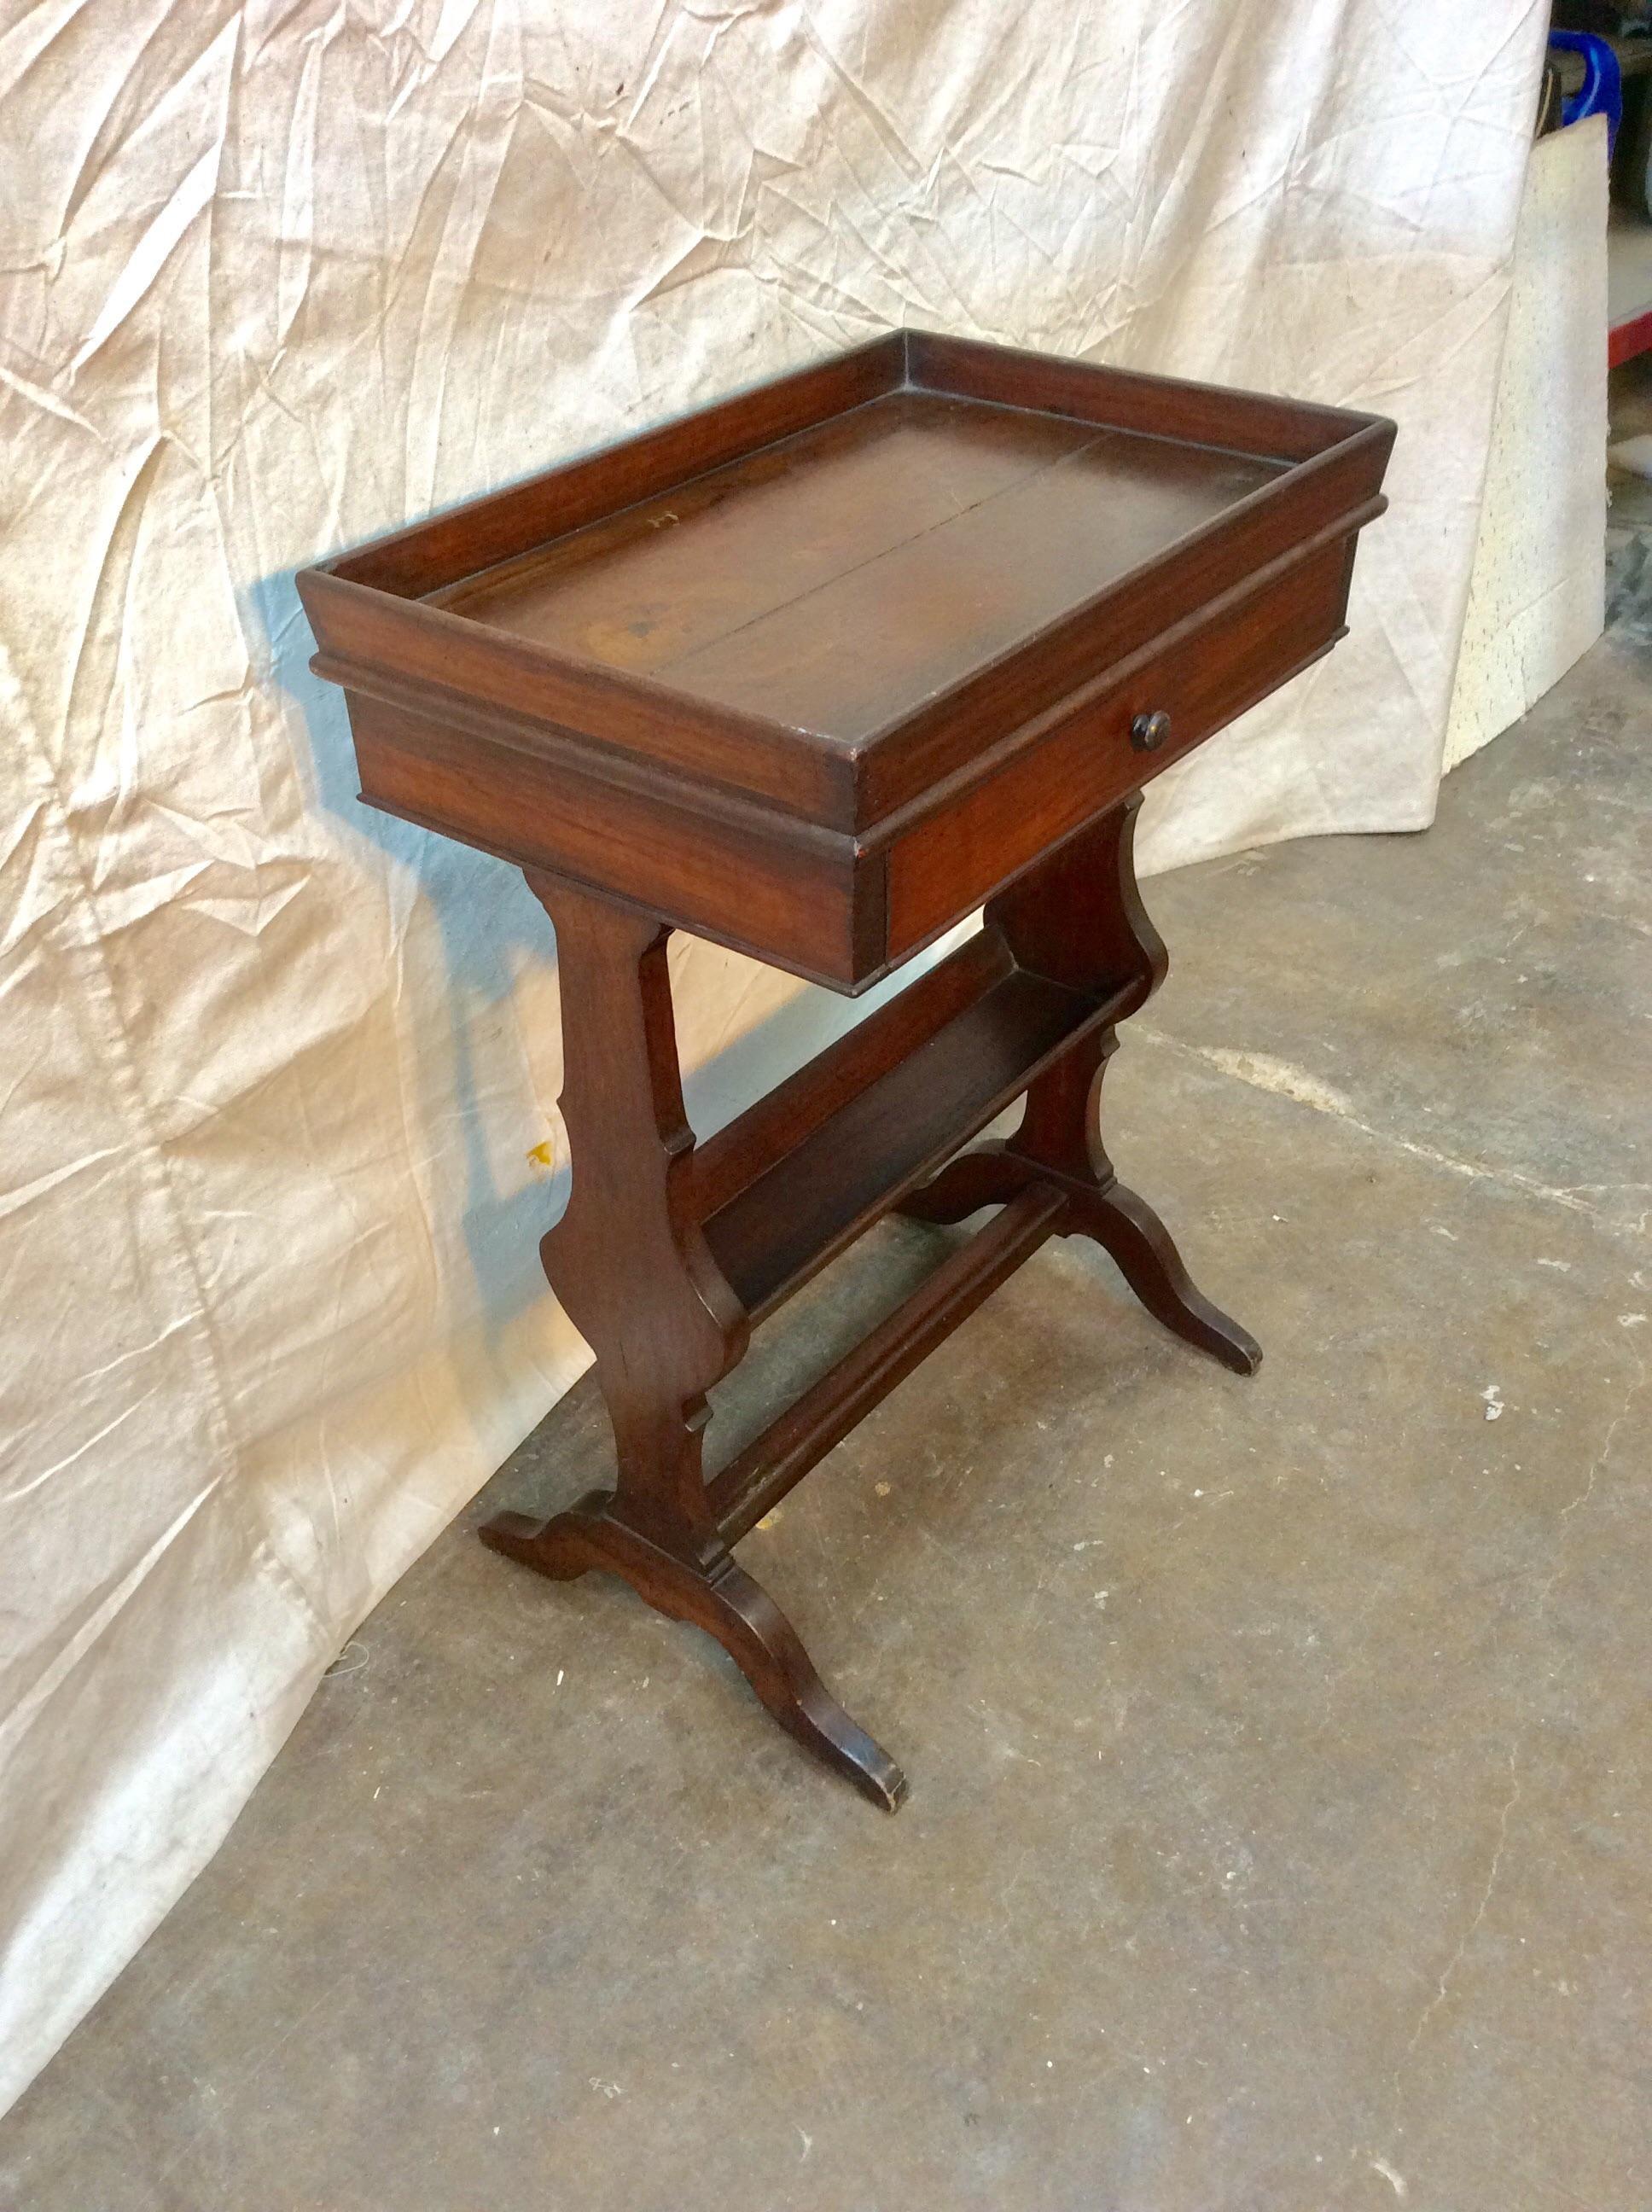 Found in the South of France, this petite early 20th century French Walnut Side Table is crafted with a raised edge top, one hand dovetailed drawer adorned with a wood pull and a storage space on the bottom, possibly for a book or magazine. The two